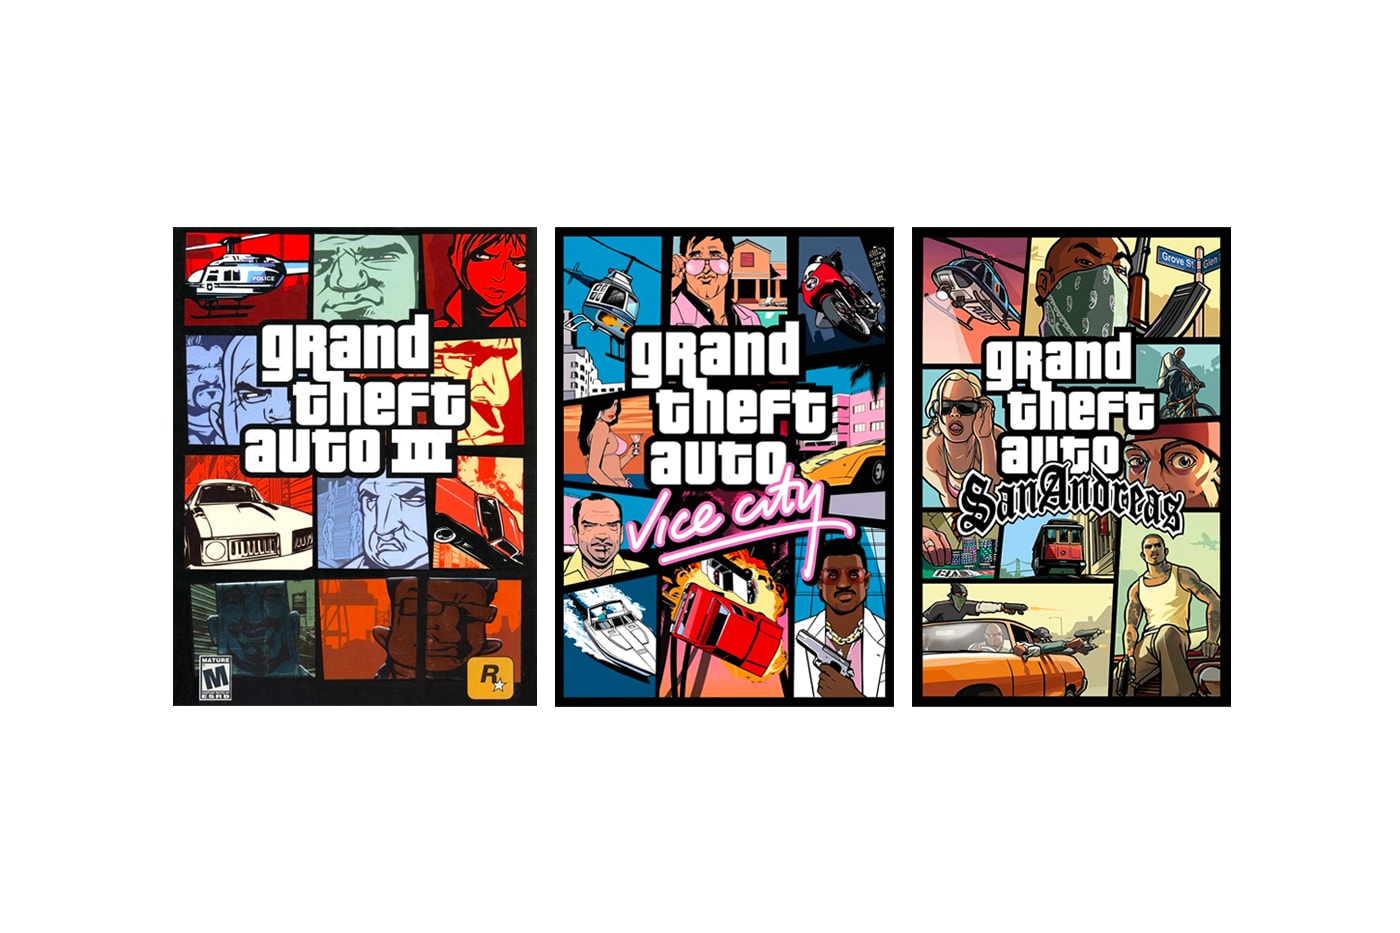 30 GTA 6 features reportedly confirmed from leaks and rumours